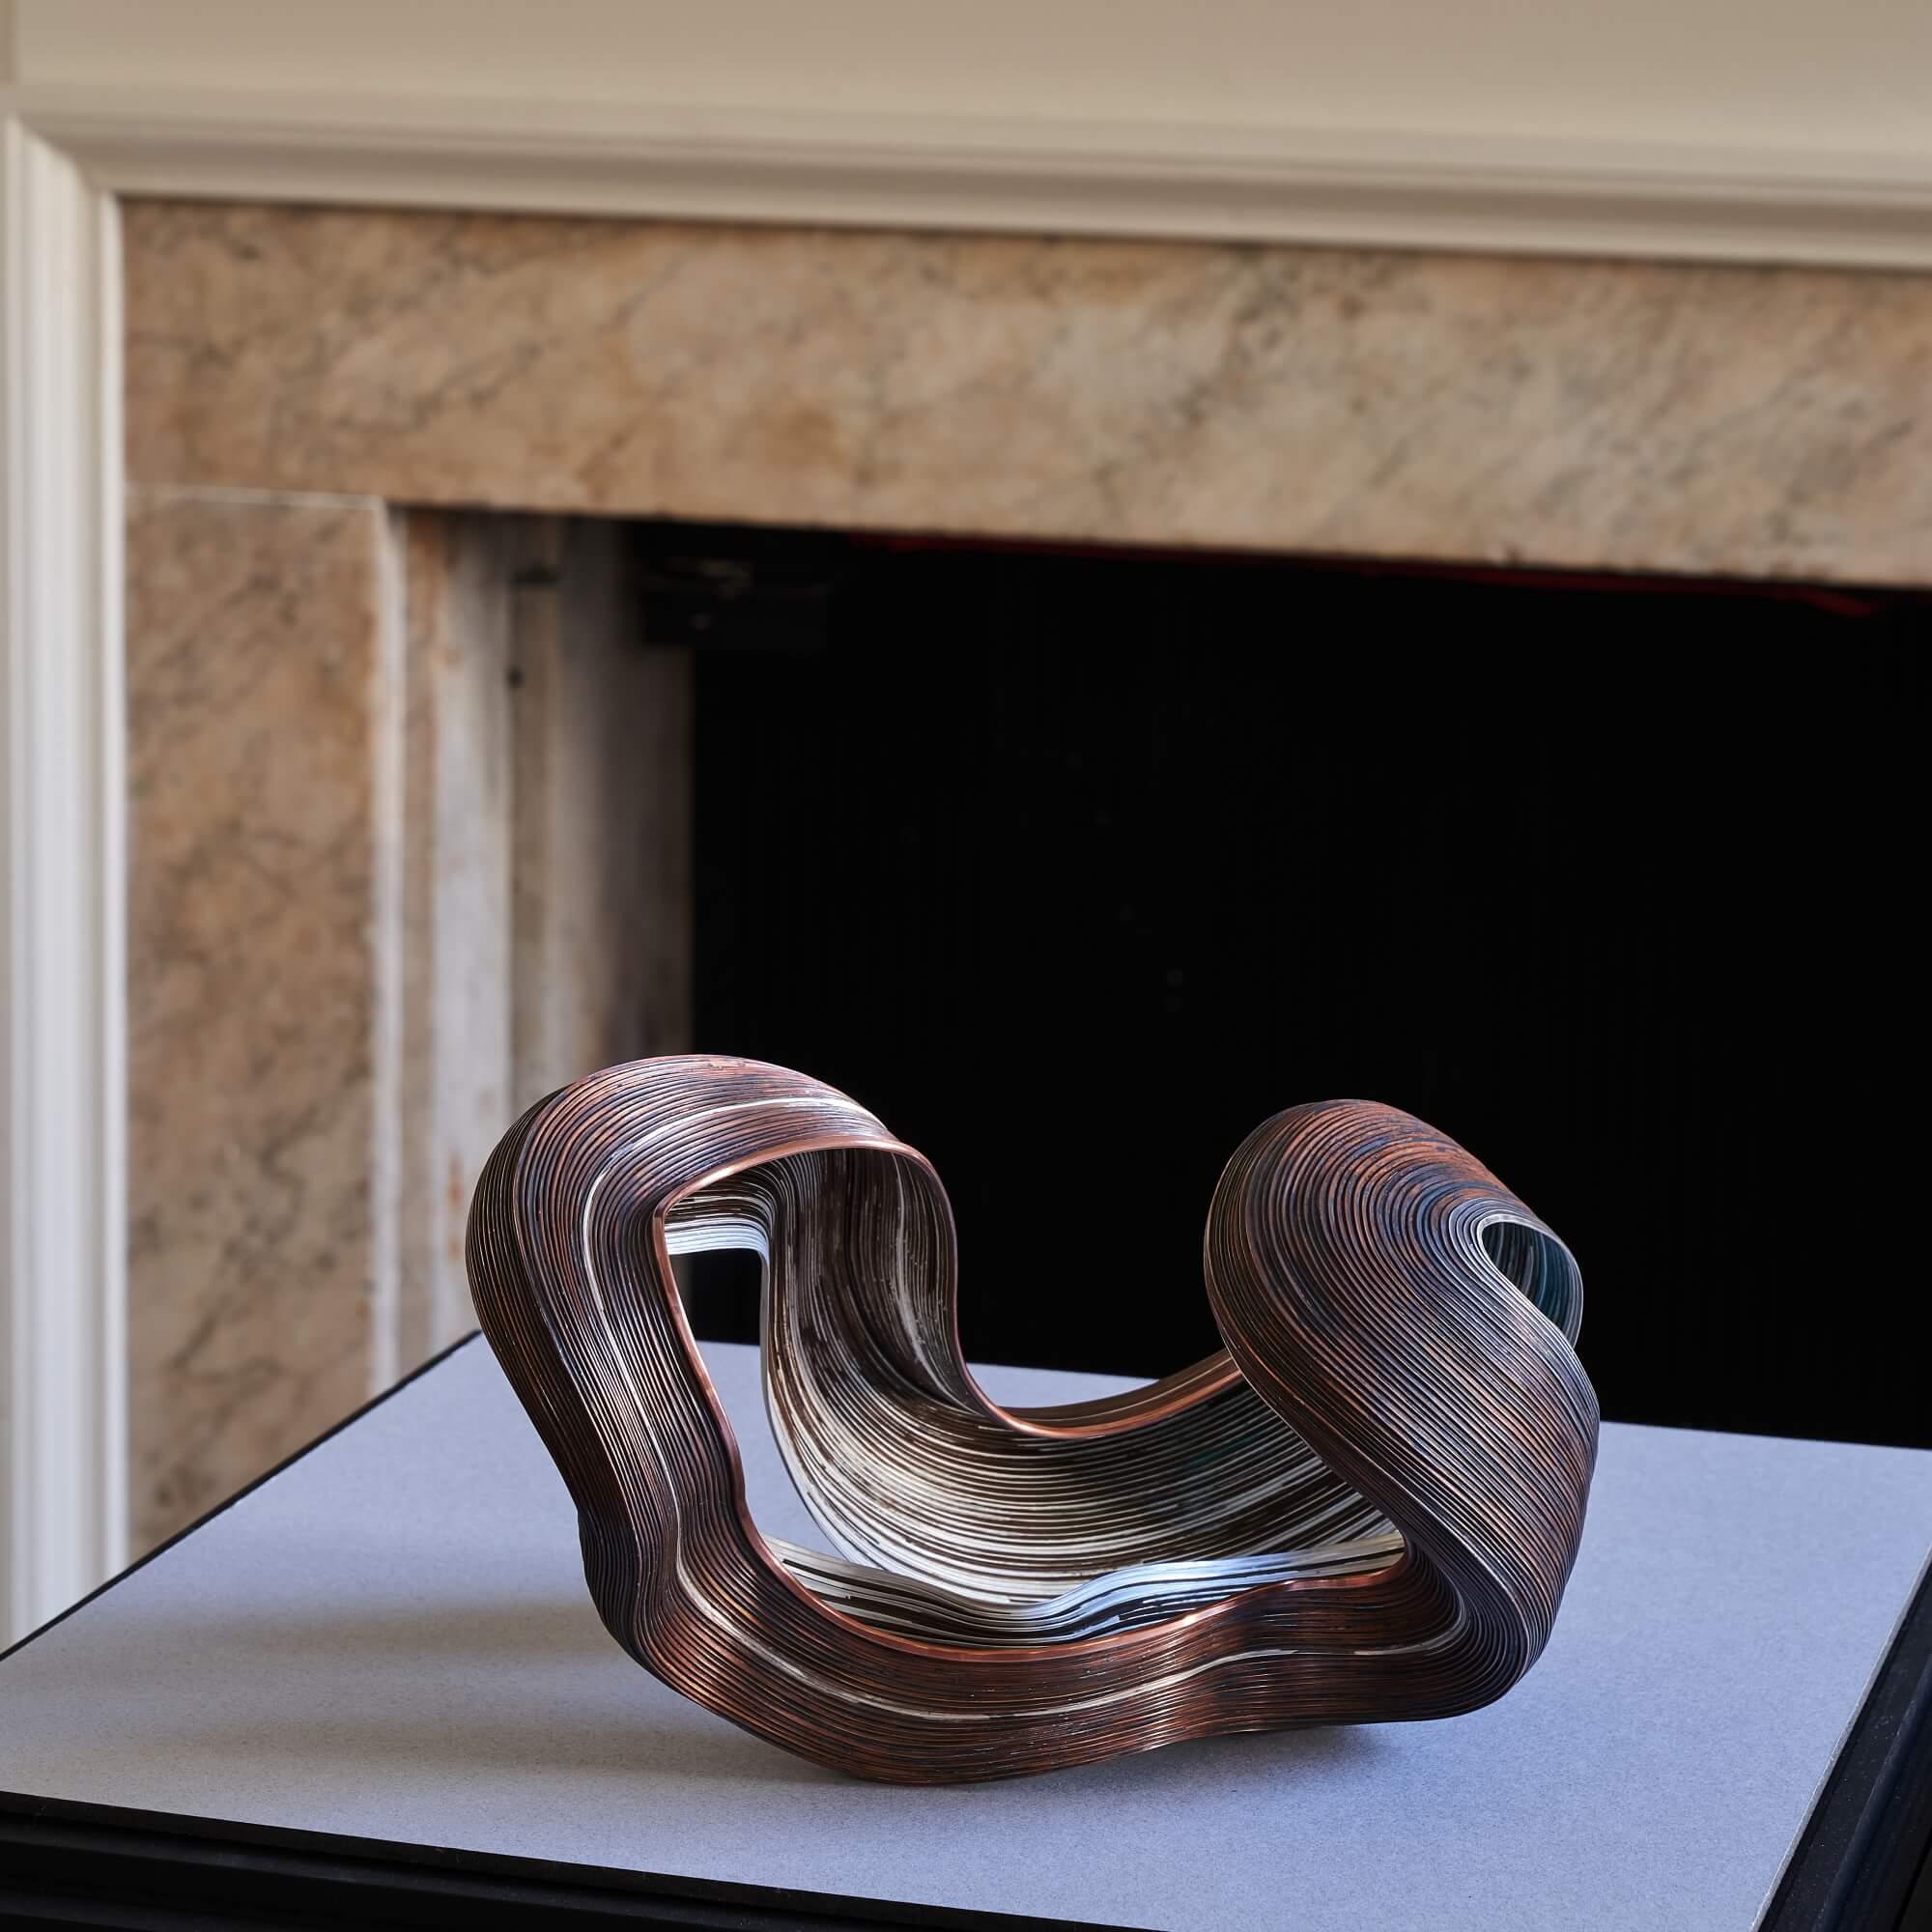 Inspired by the organic nature of her materials, Nan Nan Liu’s earthy copper and sterling silver sculpture is handcrafted using hammering and soldering techniques. Liu initially conceives her abstract forms by working from photographs, building her